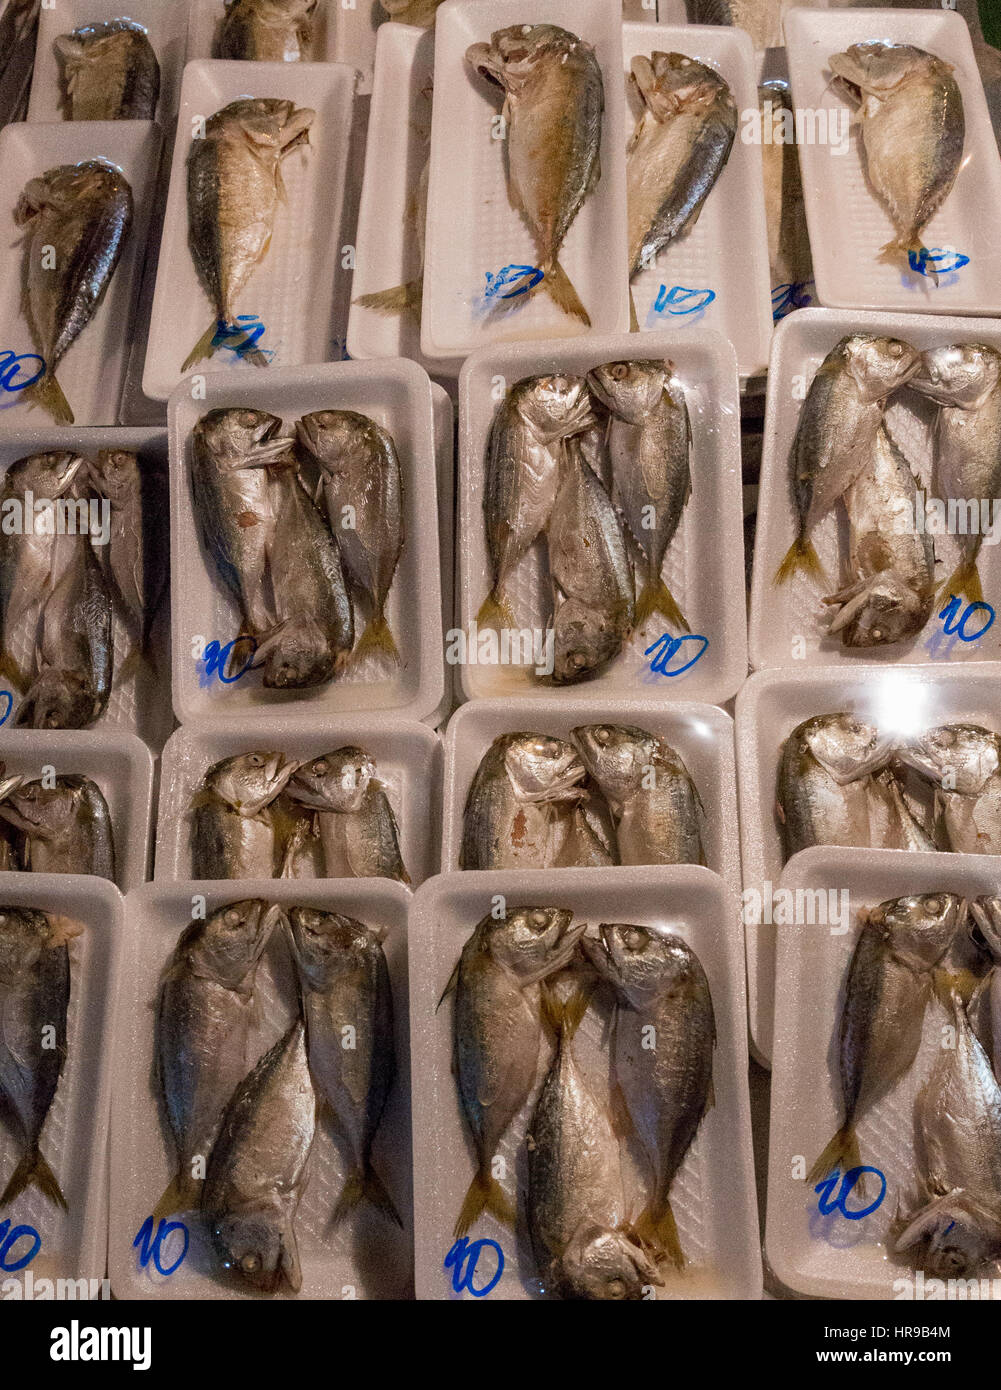 Fish for sale at Warorot Market (AKA Kad Luang), in Chiang Mai, Thailand. Stock Photo